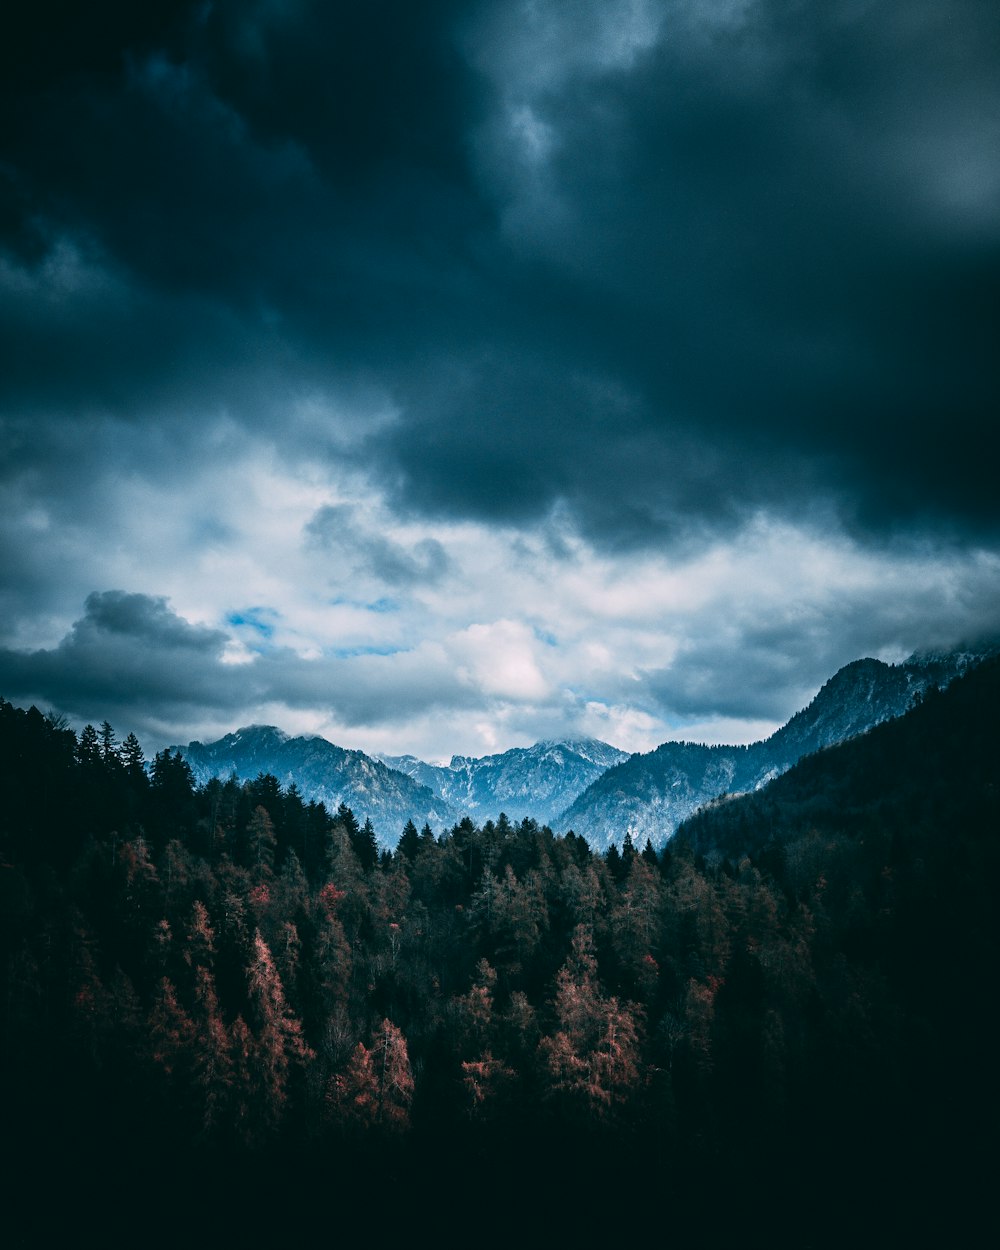 forest and mountains under gray clouds